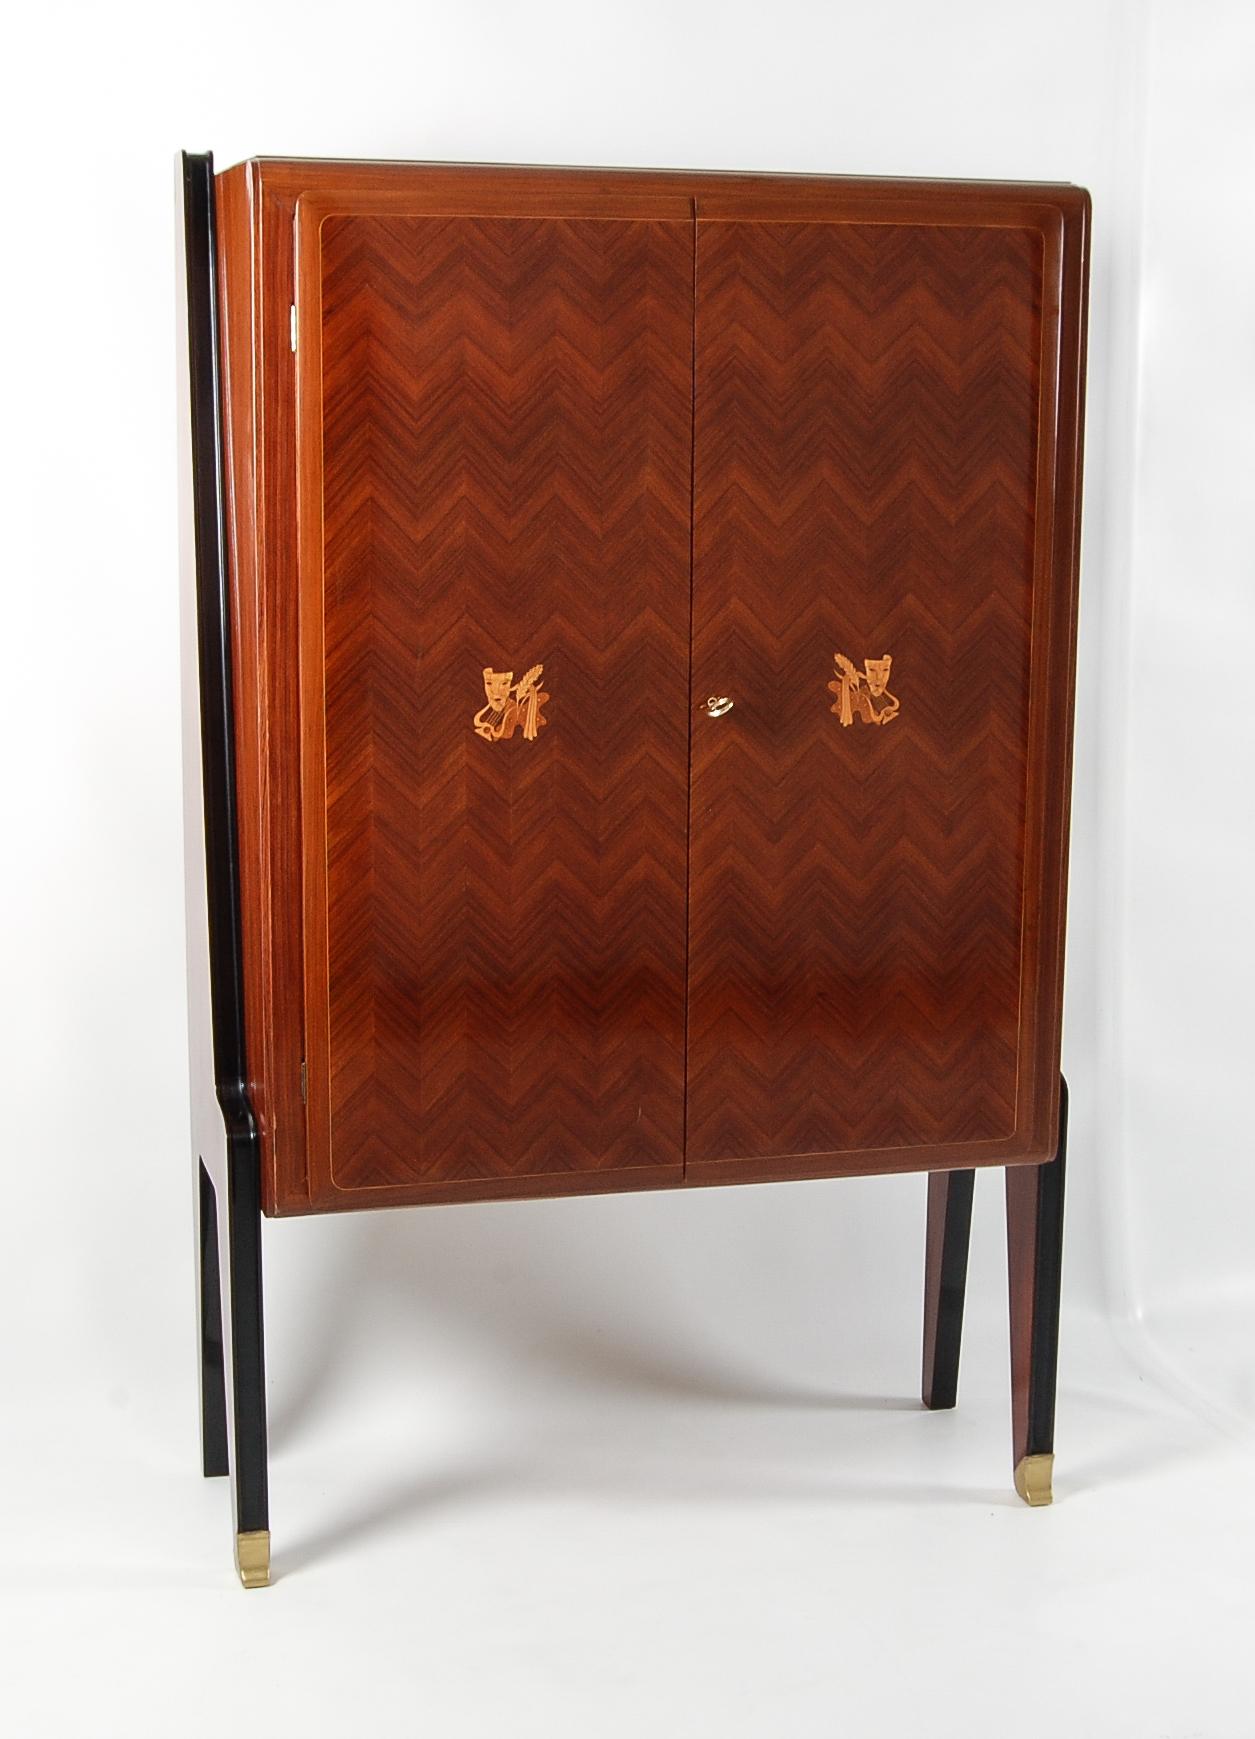 Early Midcentury French Art Deco Rosewood Bar Cabinet For Sale 2